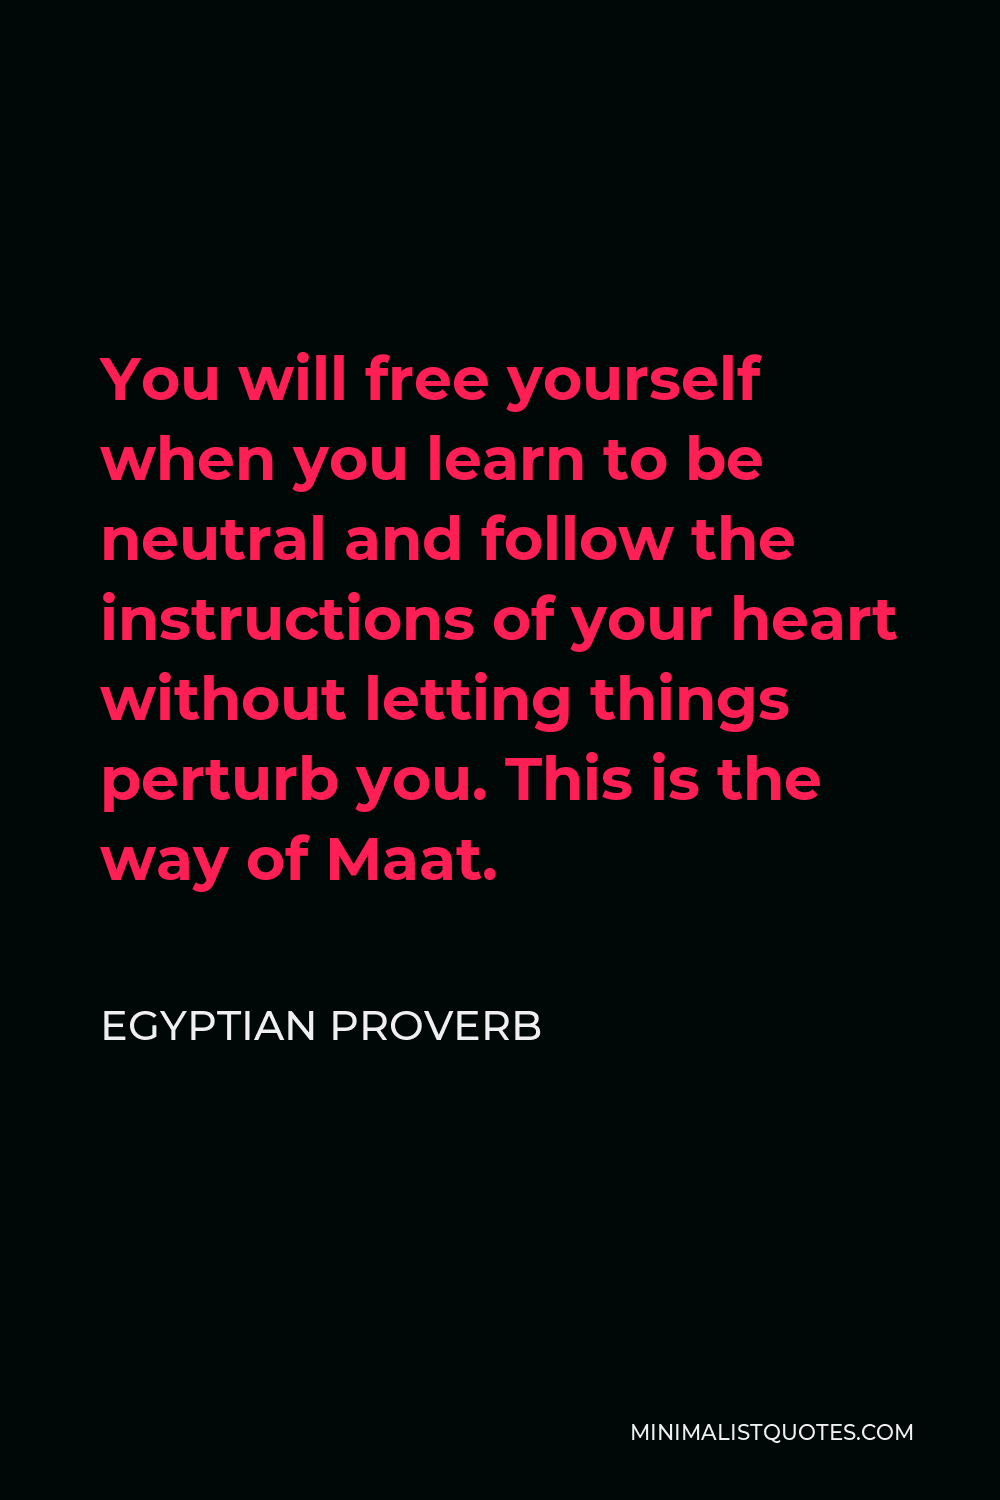 Egyptian Proverb Quote - You will free yourself when you learn to be neutral and follow the instructions of your heart without letting things perturb you. This is the way of Maat.